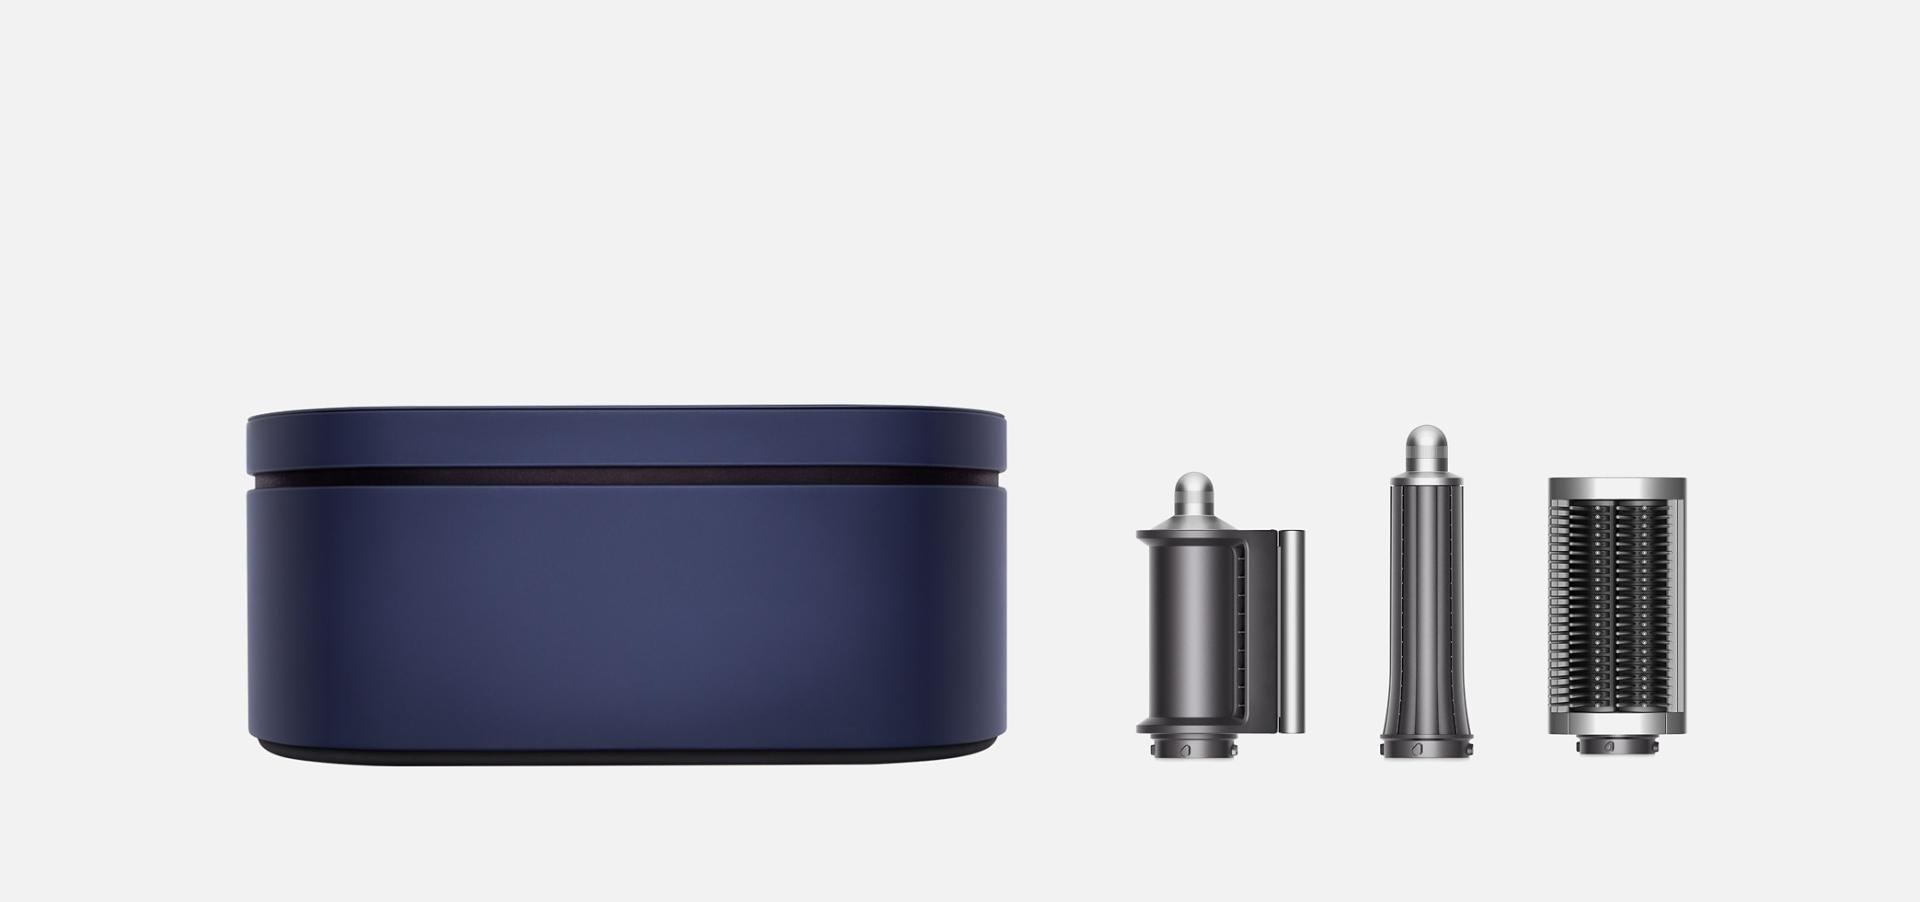 Dyson Airwrap case in Prussian blue with accessories and attachments